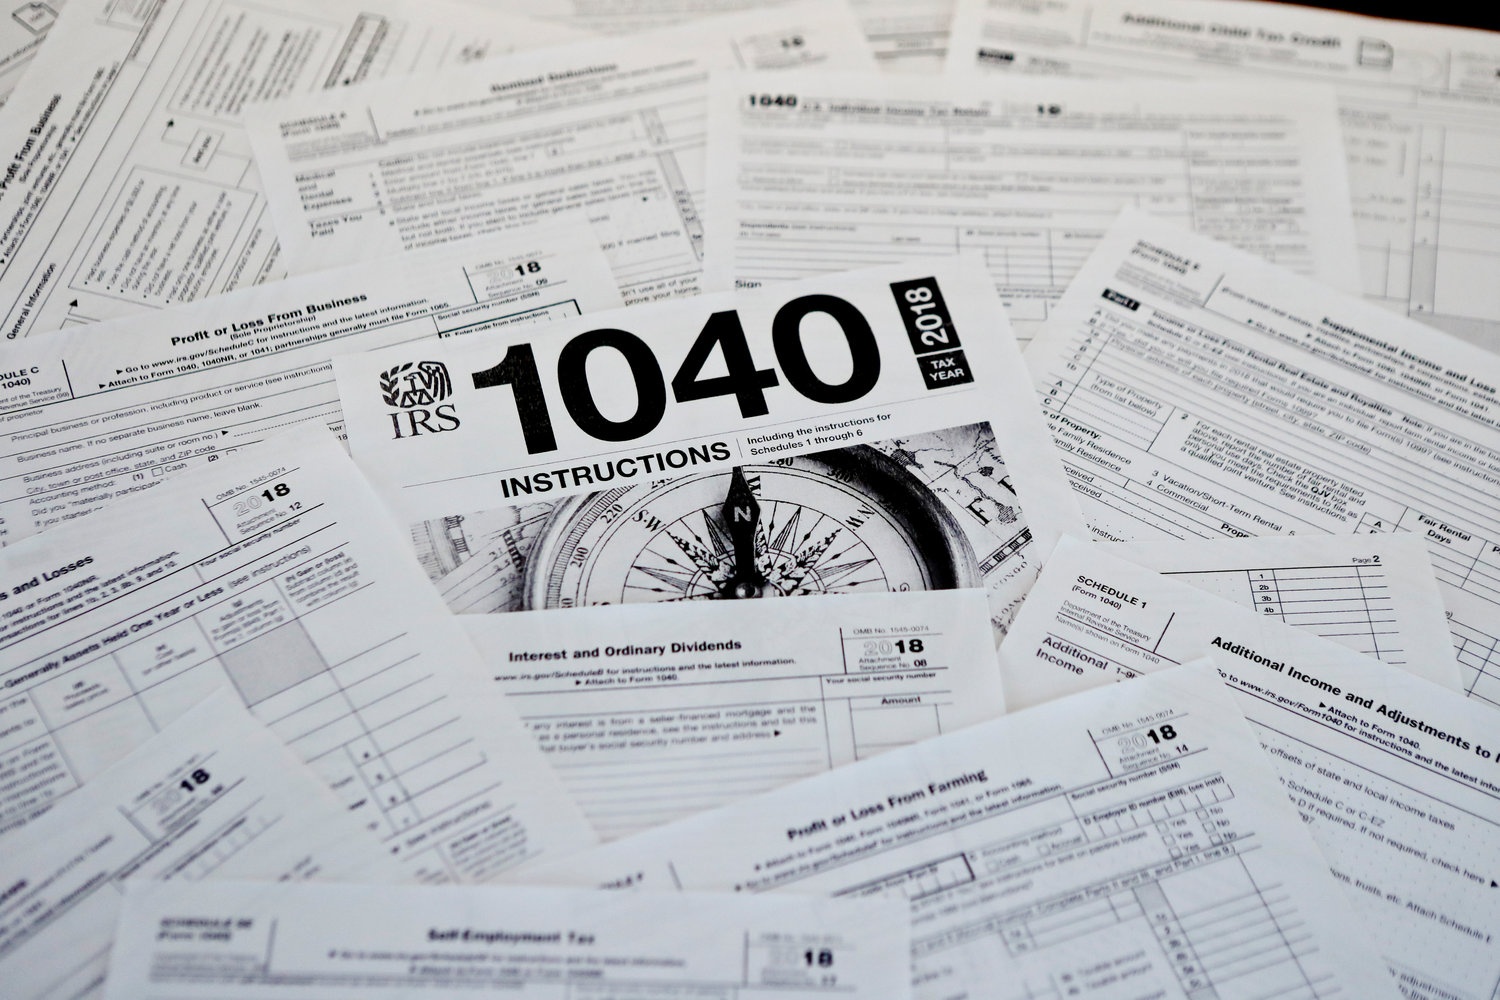 AVOID DELAYS — This file photo shows multiple forms printed from the Internal Revenue Service web page. The IRS is overburdened and understaffed, which means even the smallest error could delay the processing of your tax return for months. The biggest mistake is opting for paper filing, which could take longer to process and is often more likely to contain errors, say experts.